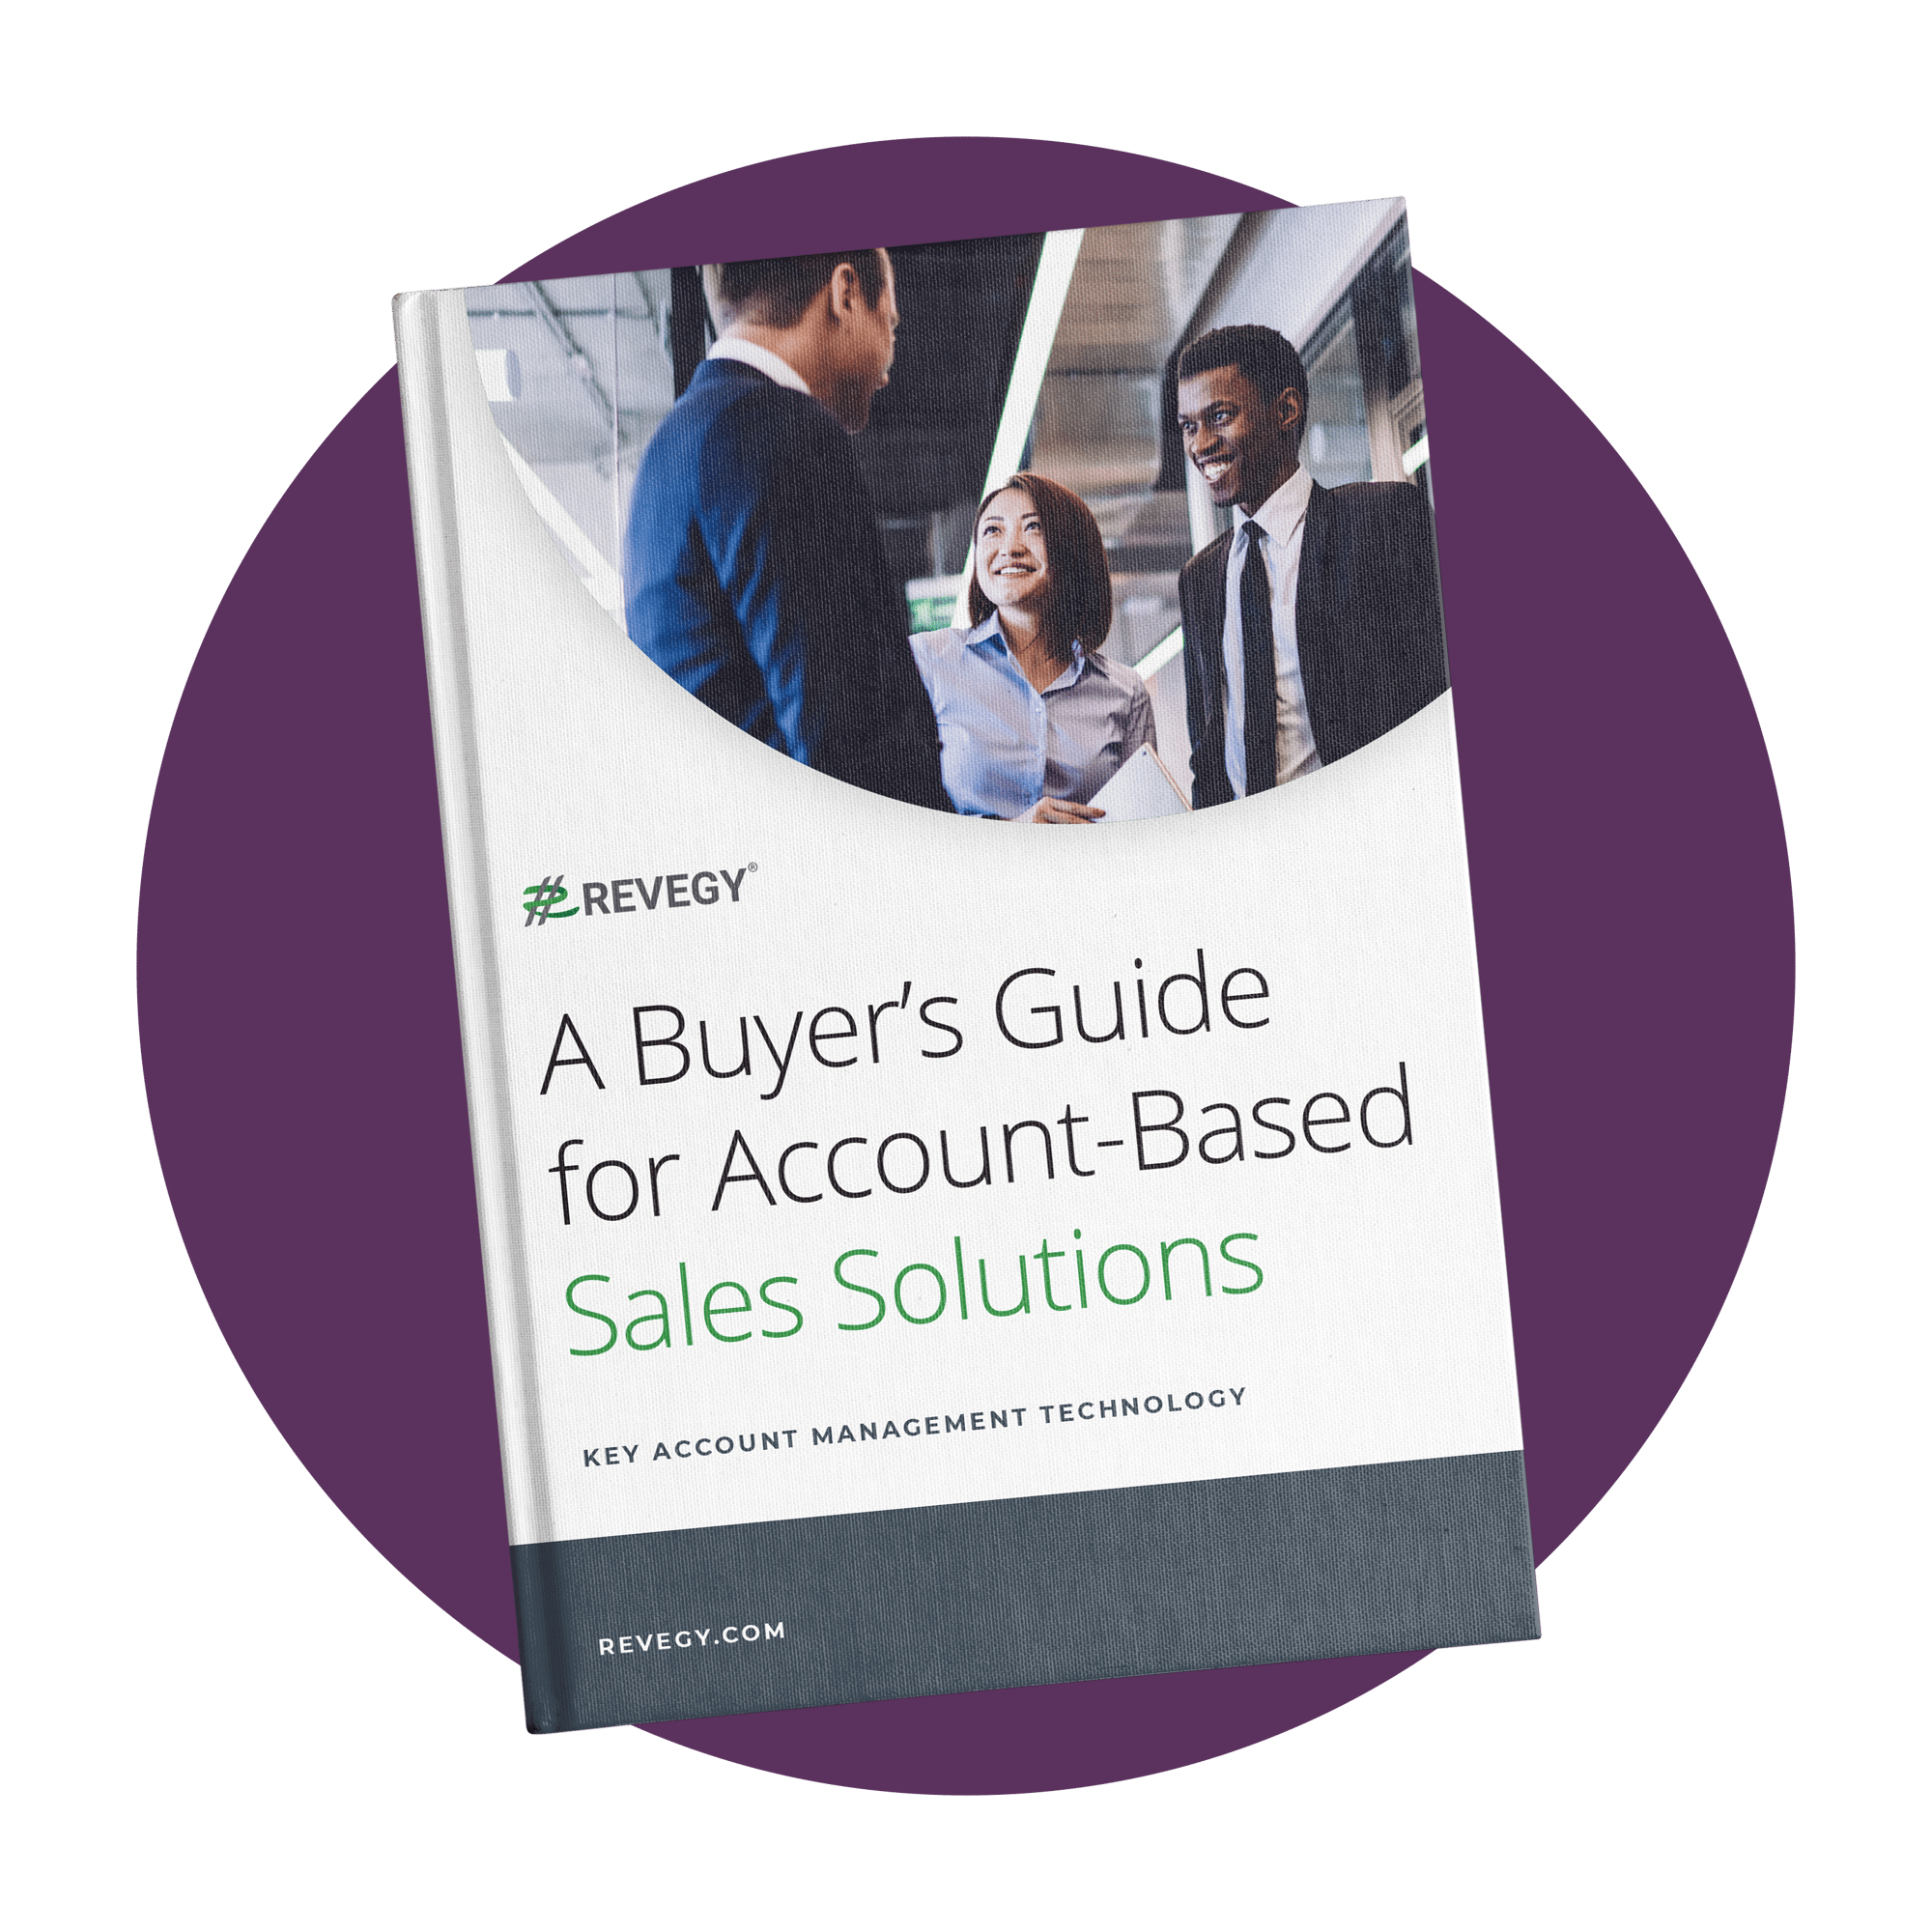 A buyers guide to ACcount-Based Sales Solutions